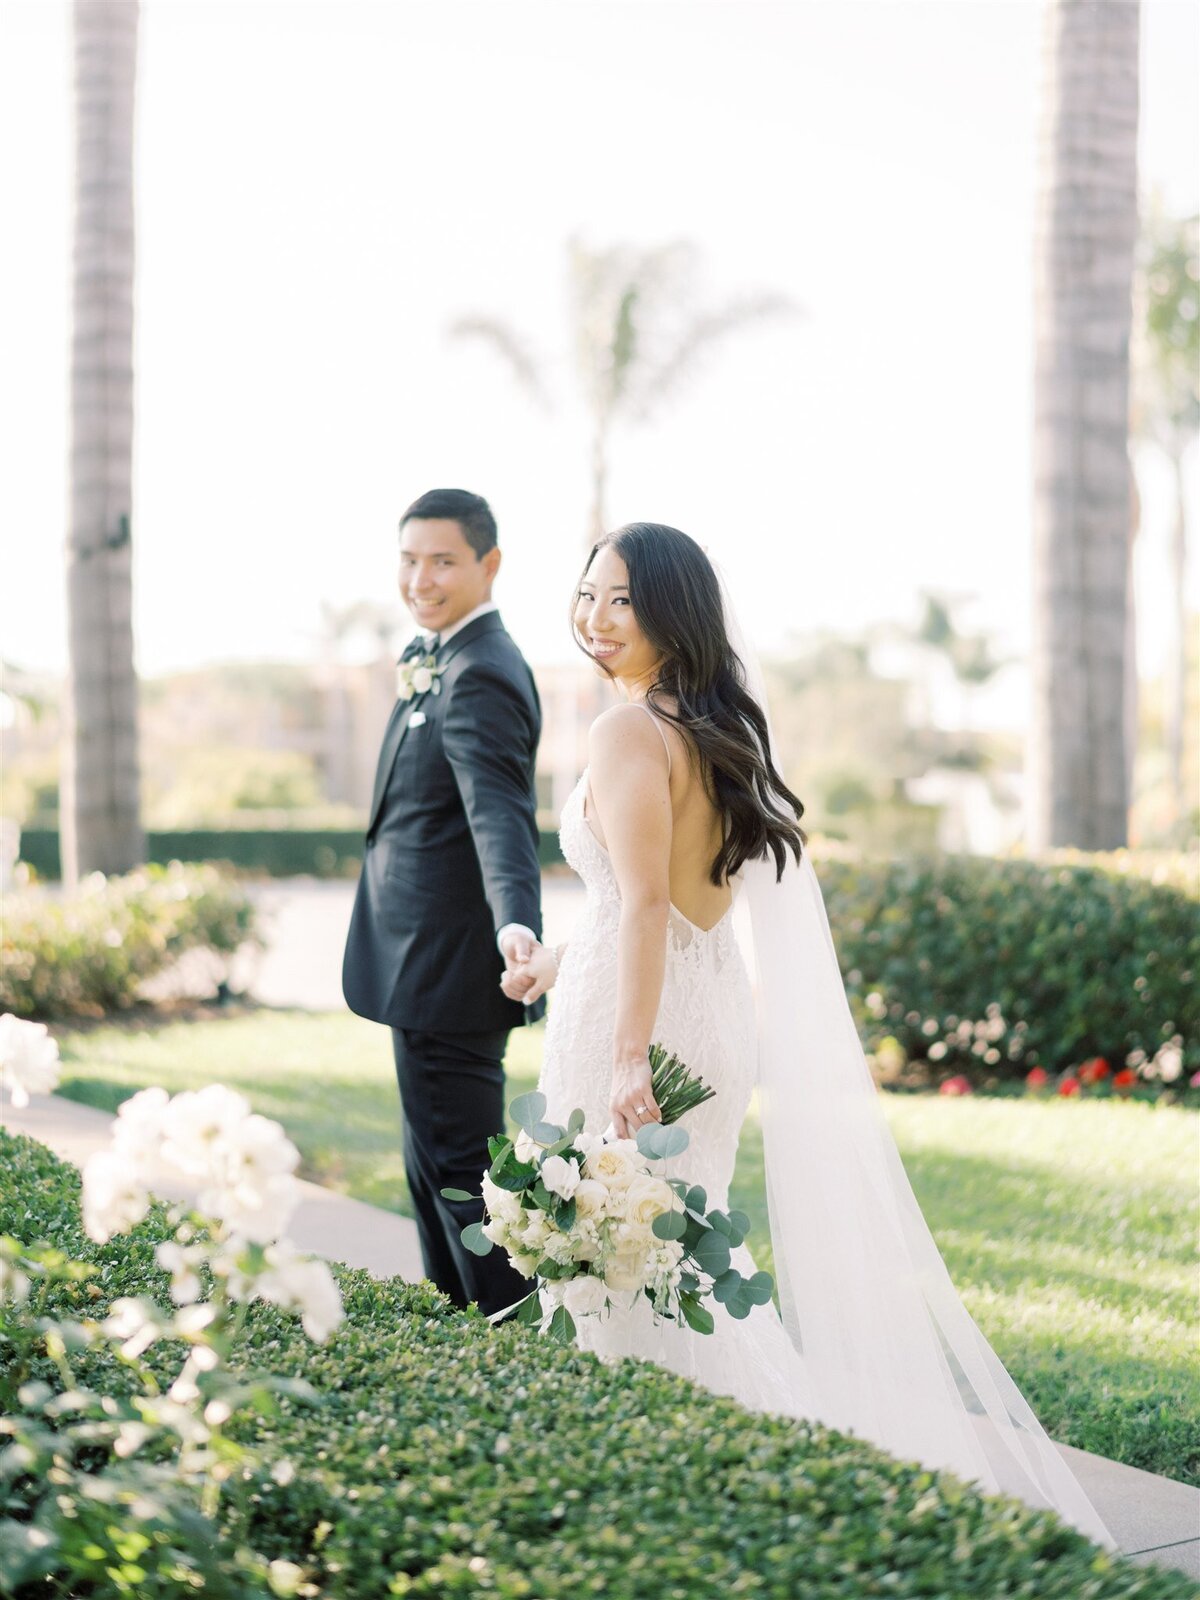 Sweetest Love Events - Sharon Fair Luxury San Diego Wedding Planner - Westin Carslbad - Ether and Smith Photography-71